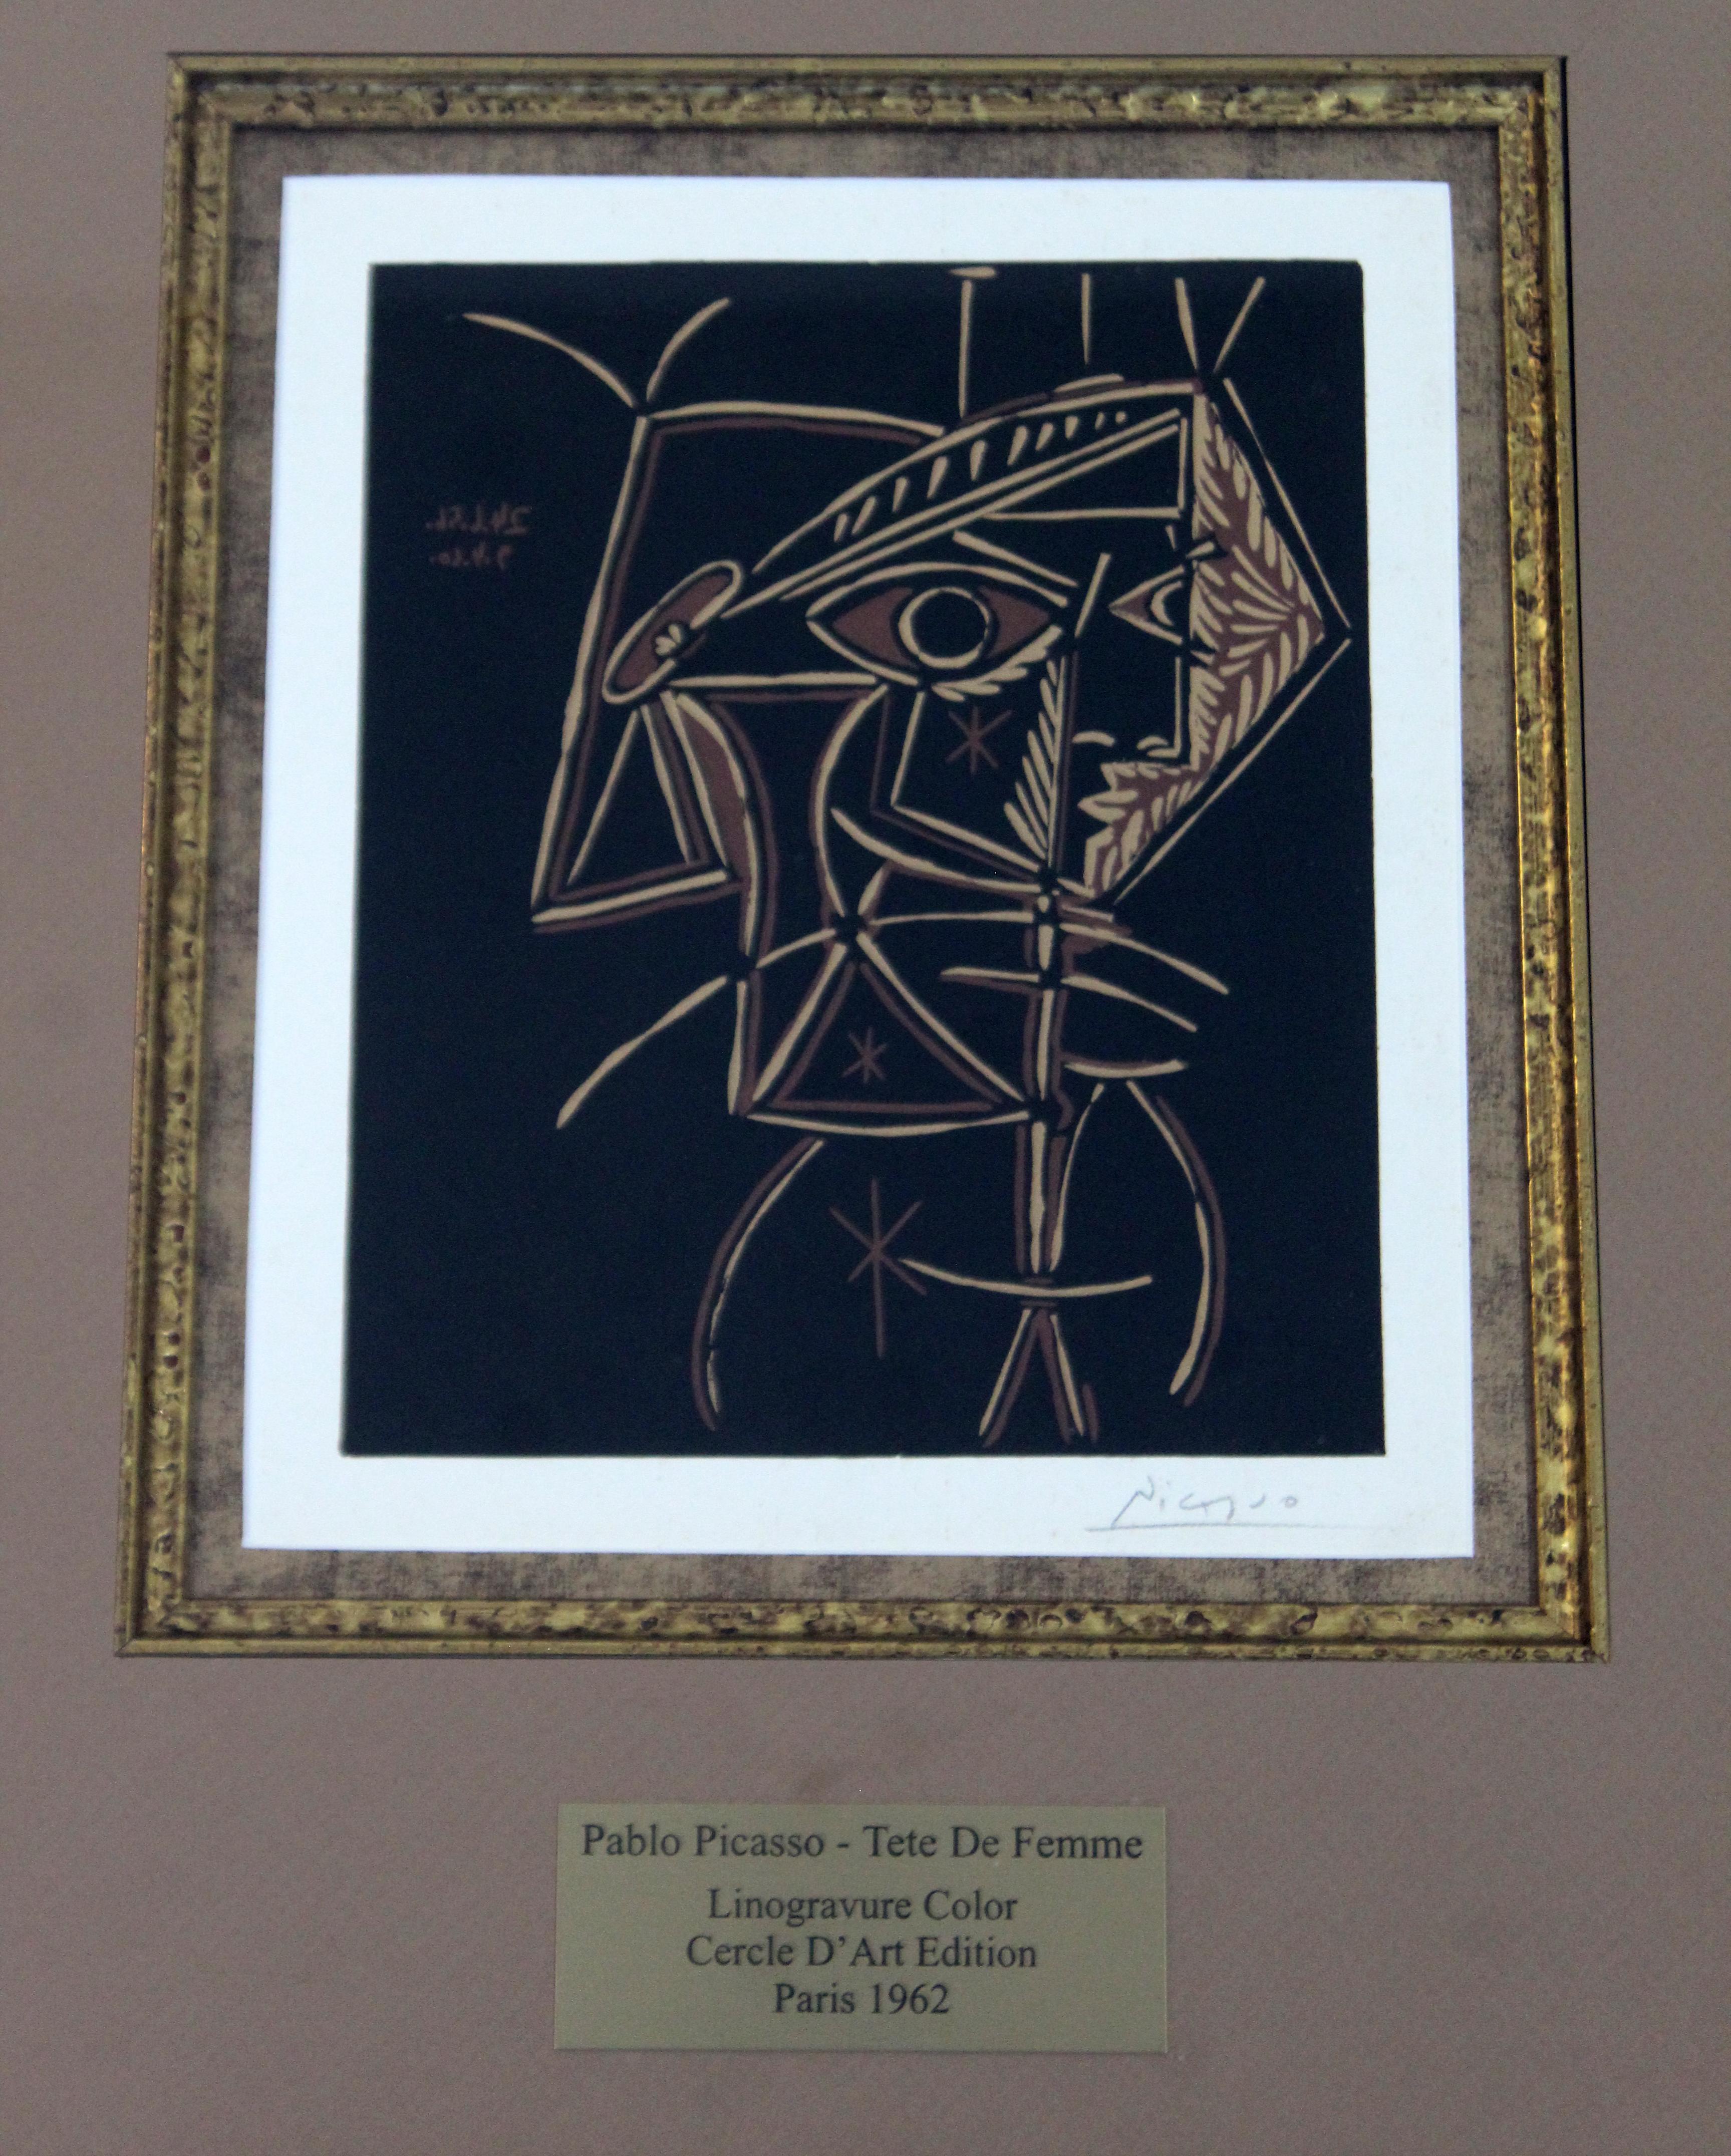 For your consideration is a fantastic, signed lithograph on dark paper, by Pablo Picasso, in gold frame with nameplate. This image is extremely hard to find. Picasso is best known for printmaking, paintings, ceramics and as a poet who spent most of